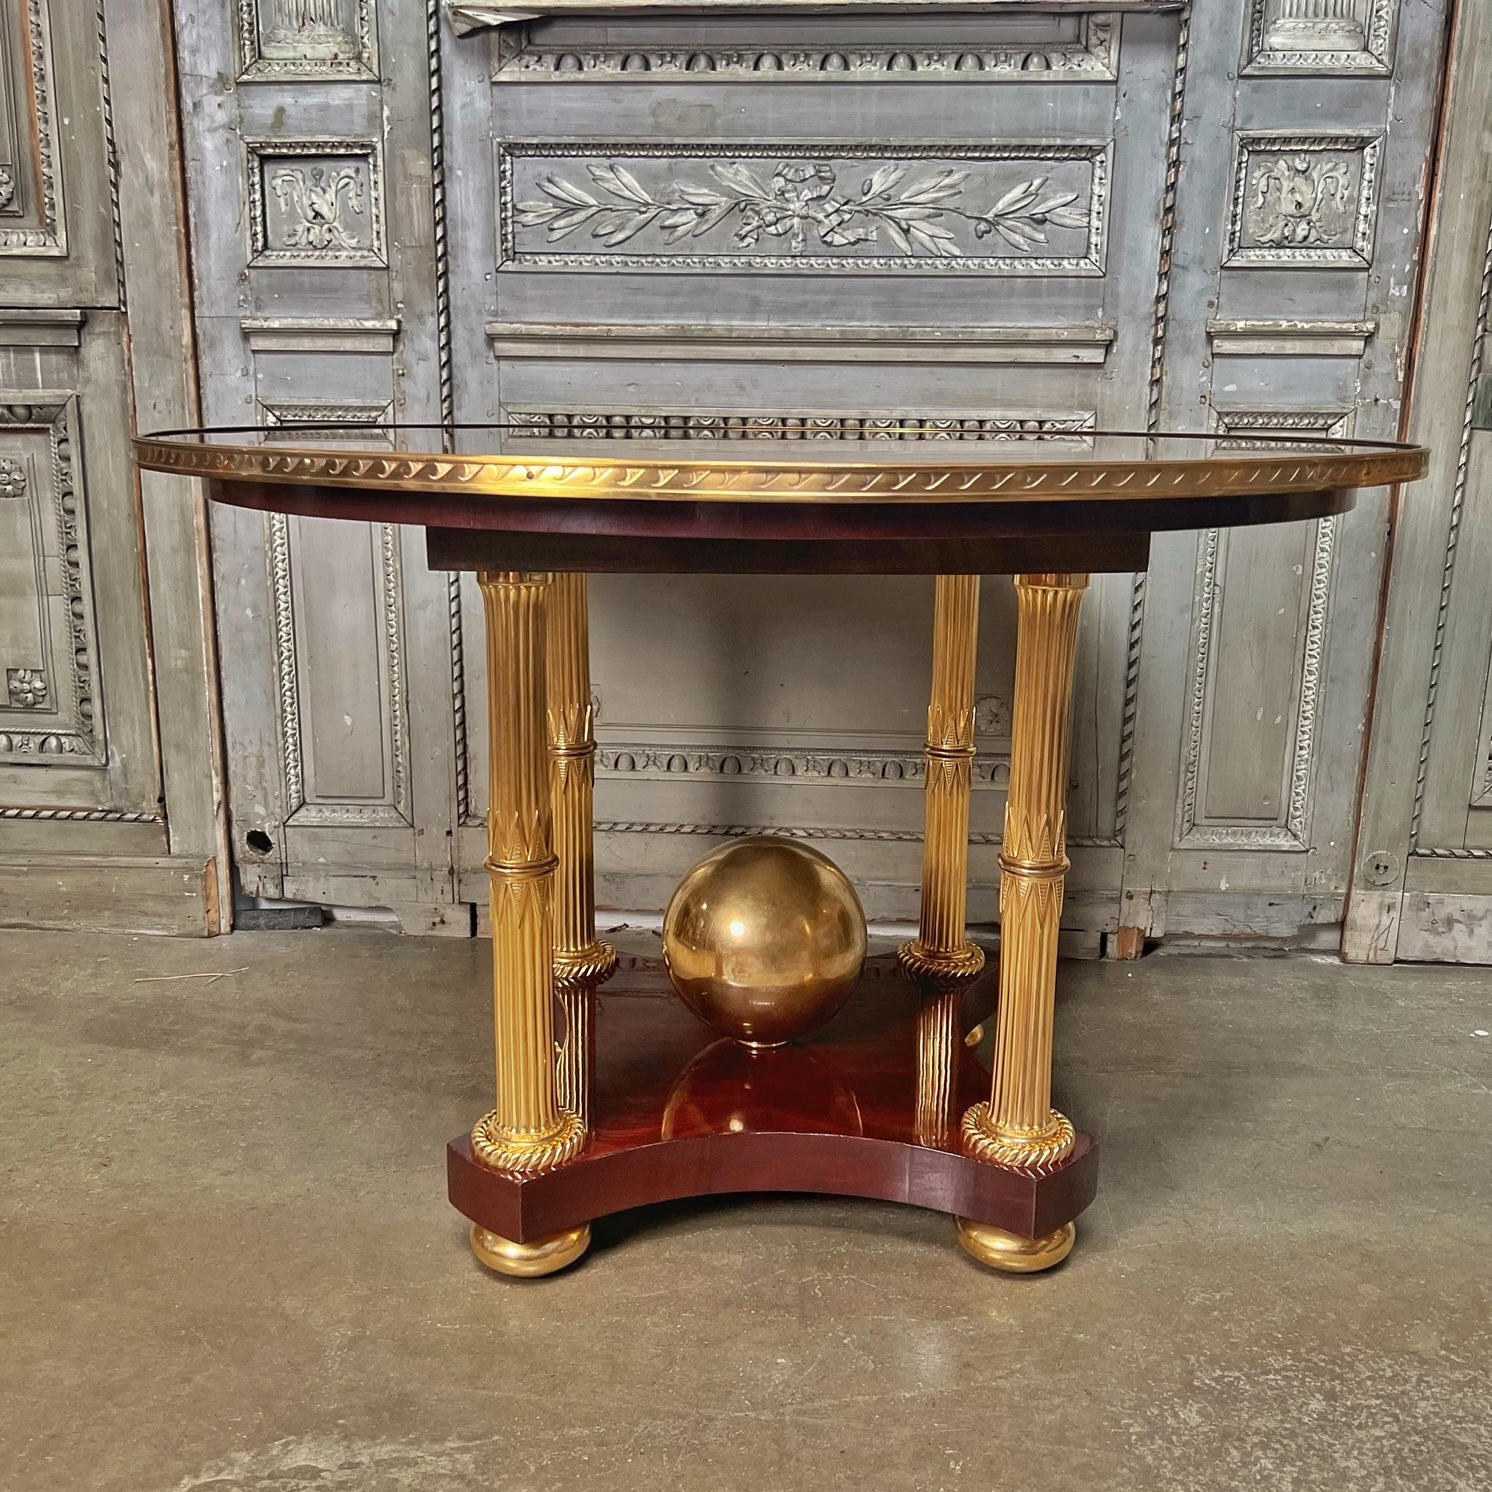 A neoclassical style center table designed and created for the late designer Alberto Pinto. This magnificent table has wonderful mahogany veneered top and beautiful gilt bronze mountings. It could be used as a small dining table as well. 
The